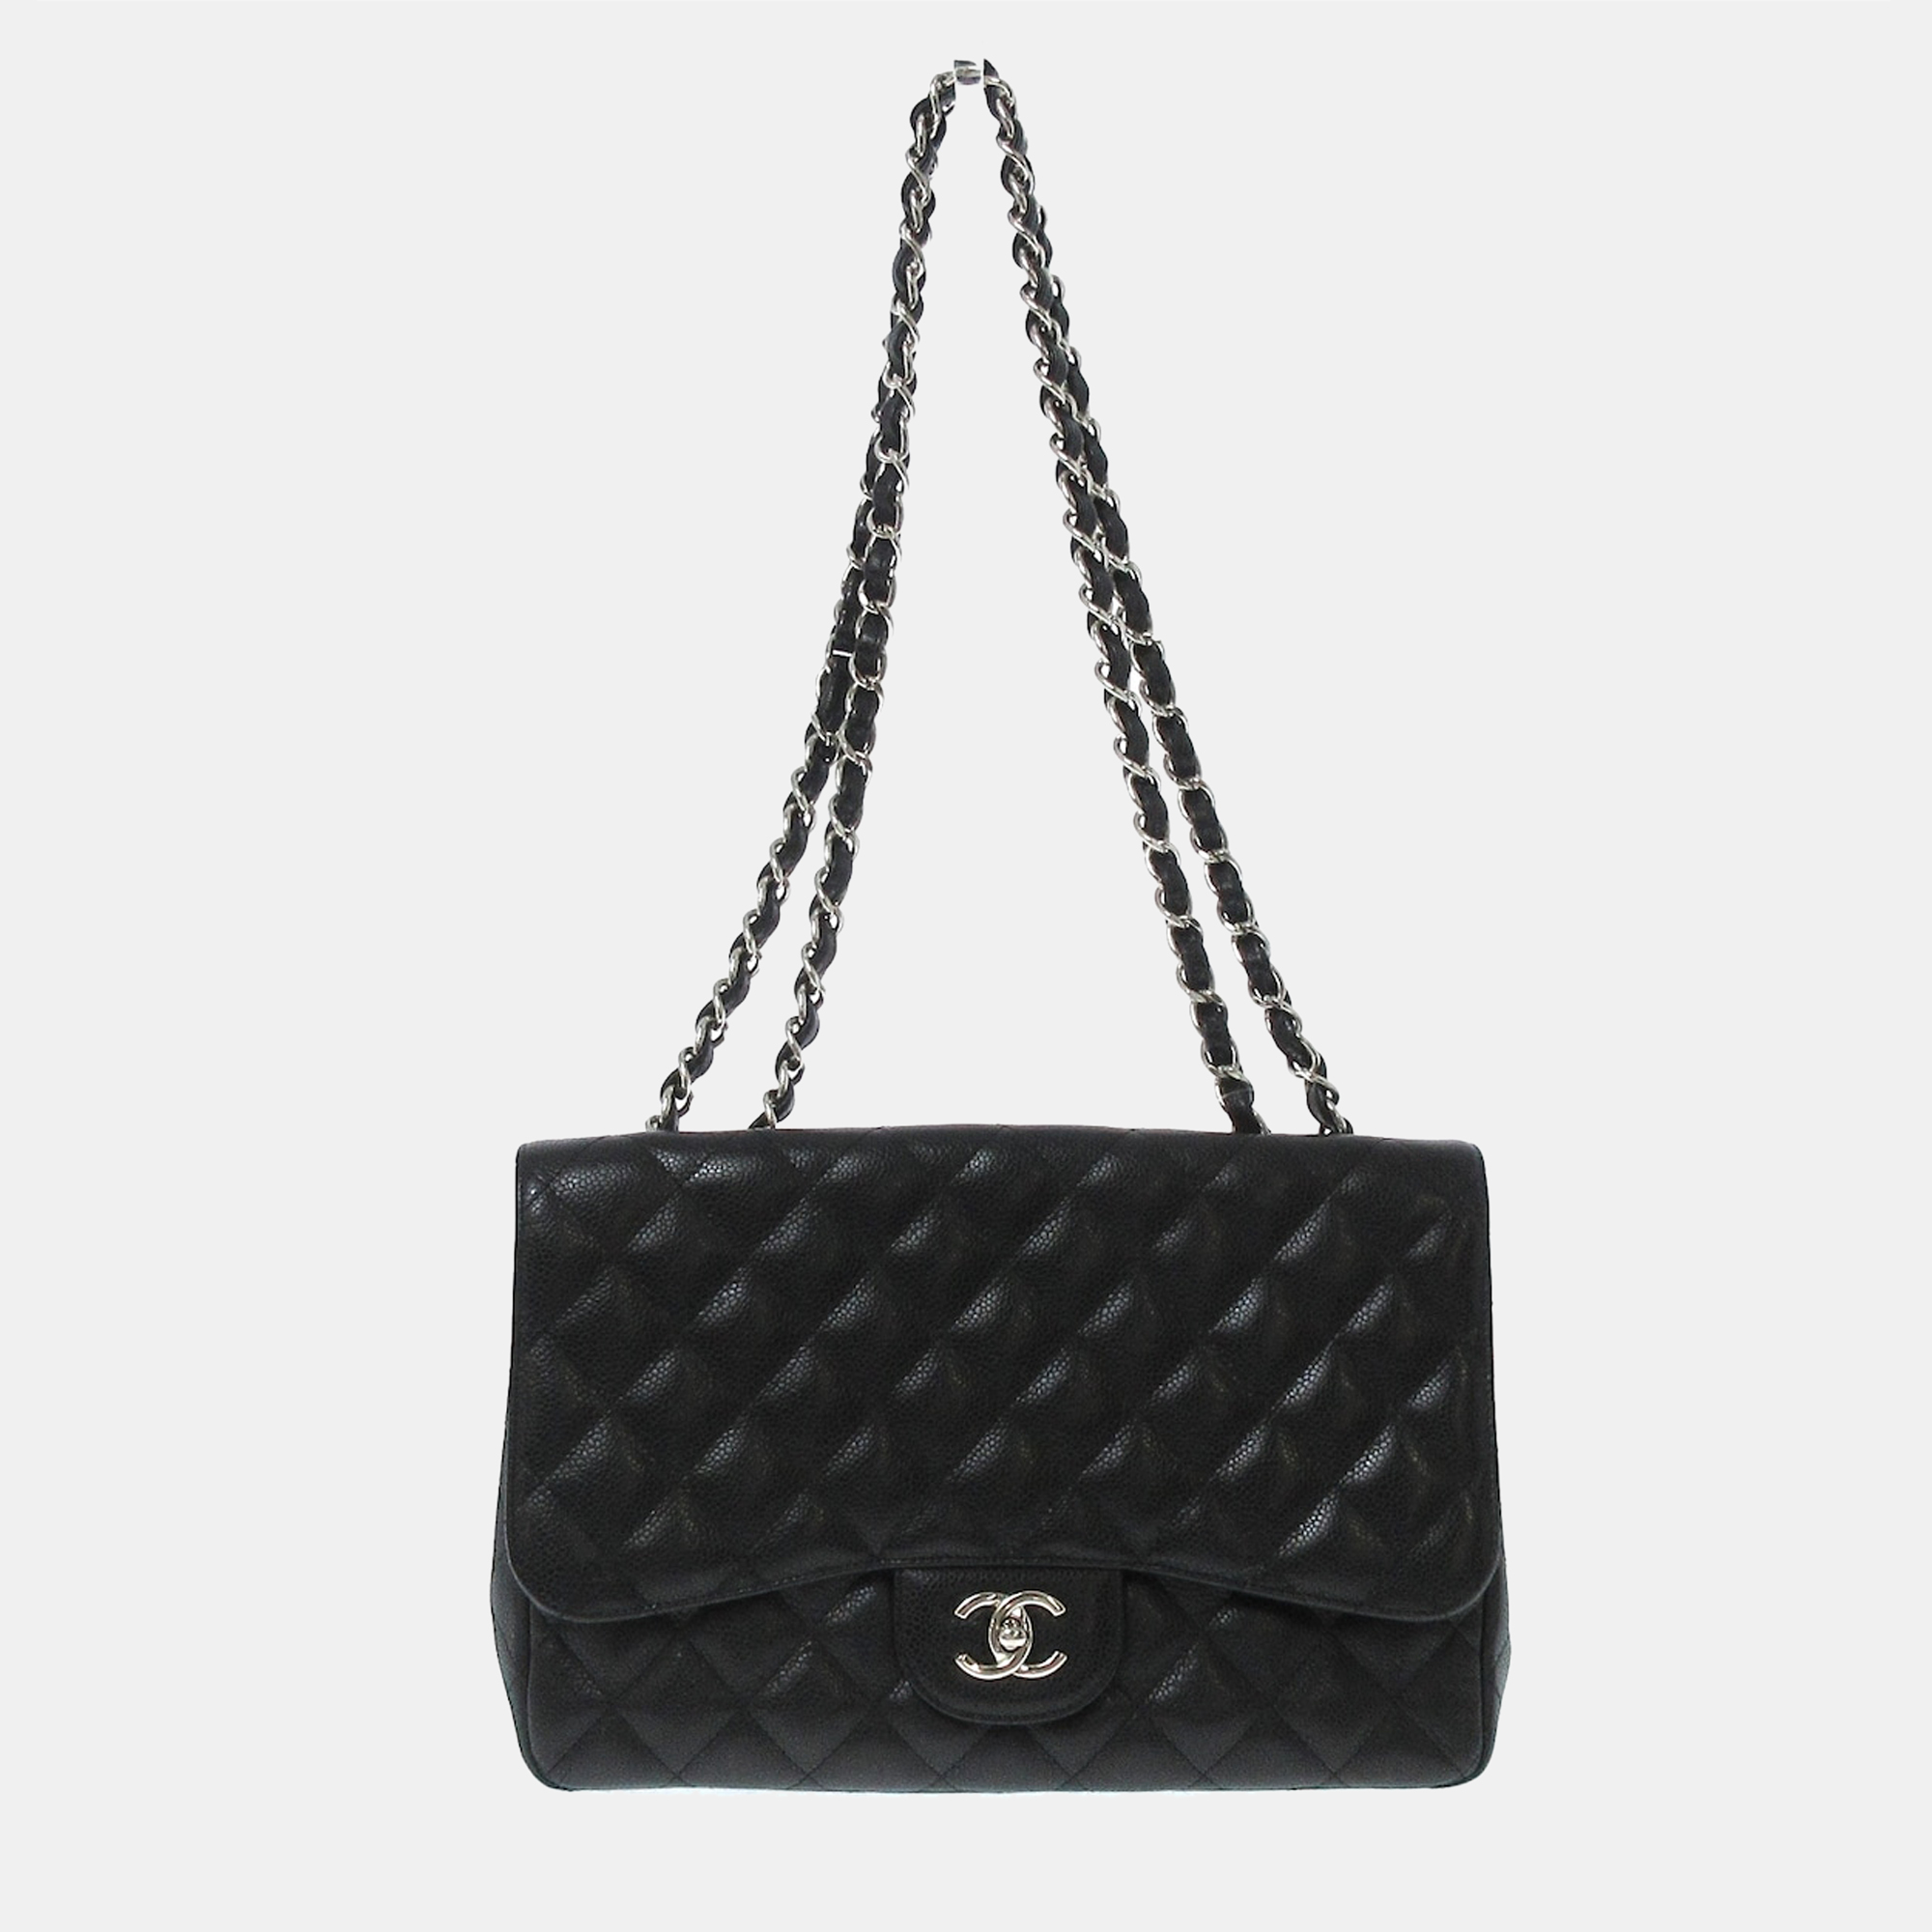 Pre-owned Chanel Black Leather Medium Classic Single Flap Bag